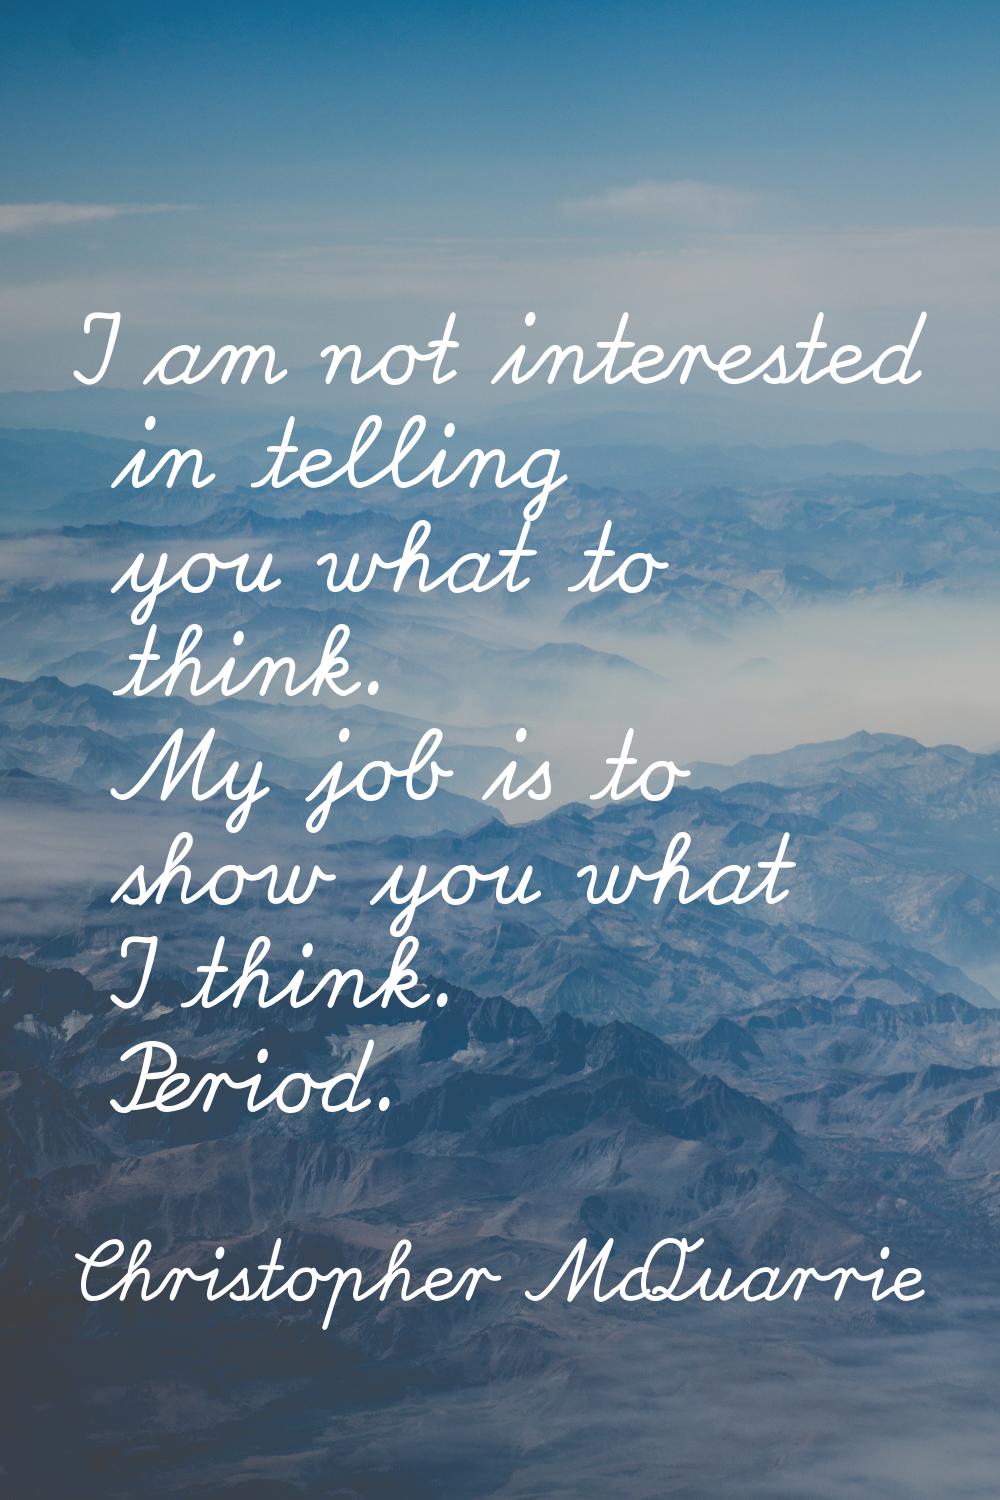 I am not interested in telling you what to think. My job is to show you what I think. Period.